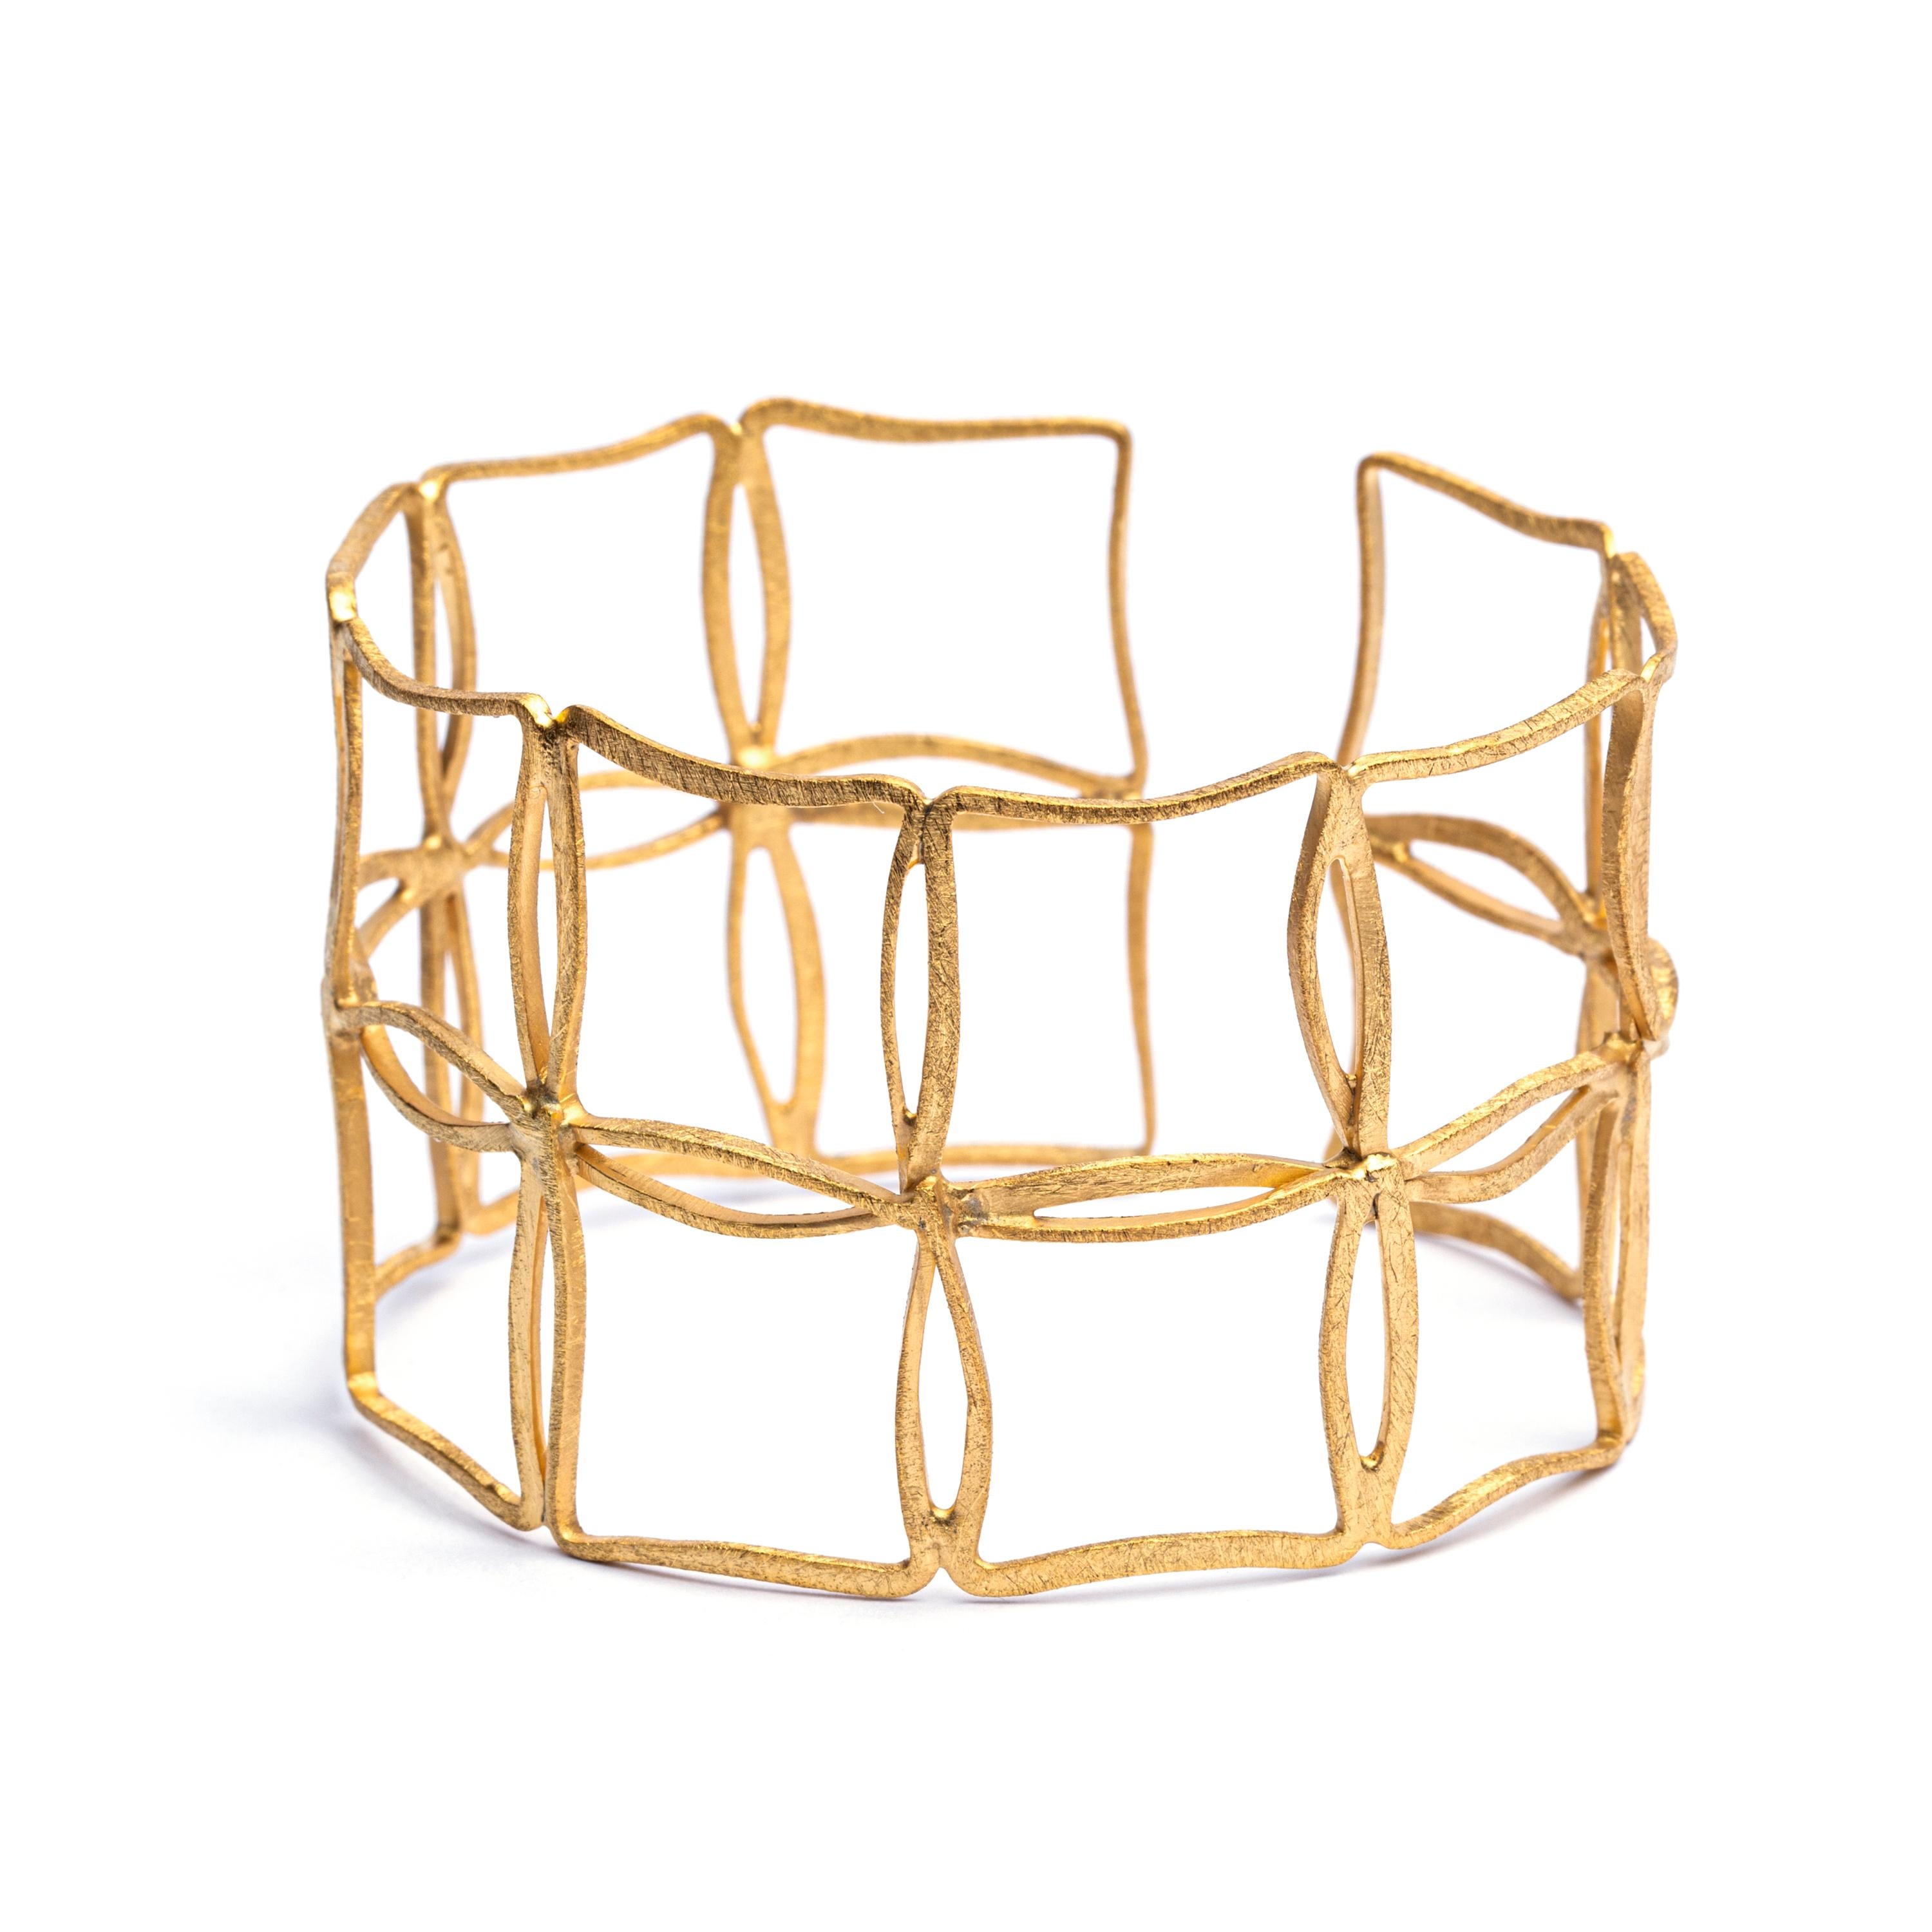 Alex Jona Gold-Plated Sterling Silver Cage Bangle Bracelet In New Condition For Sale In Torino, IT